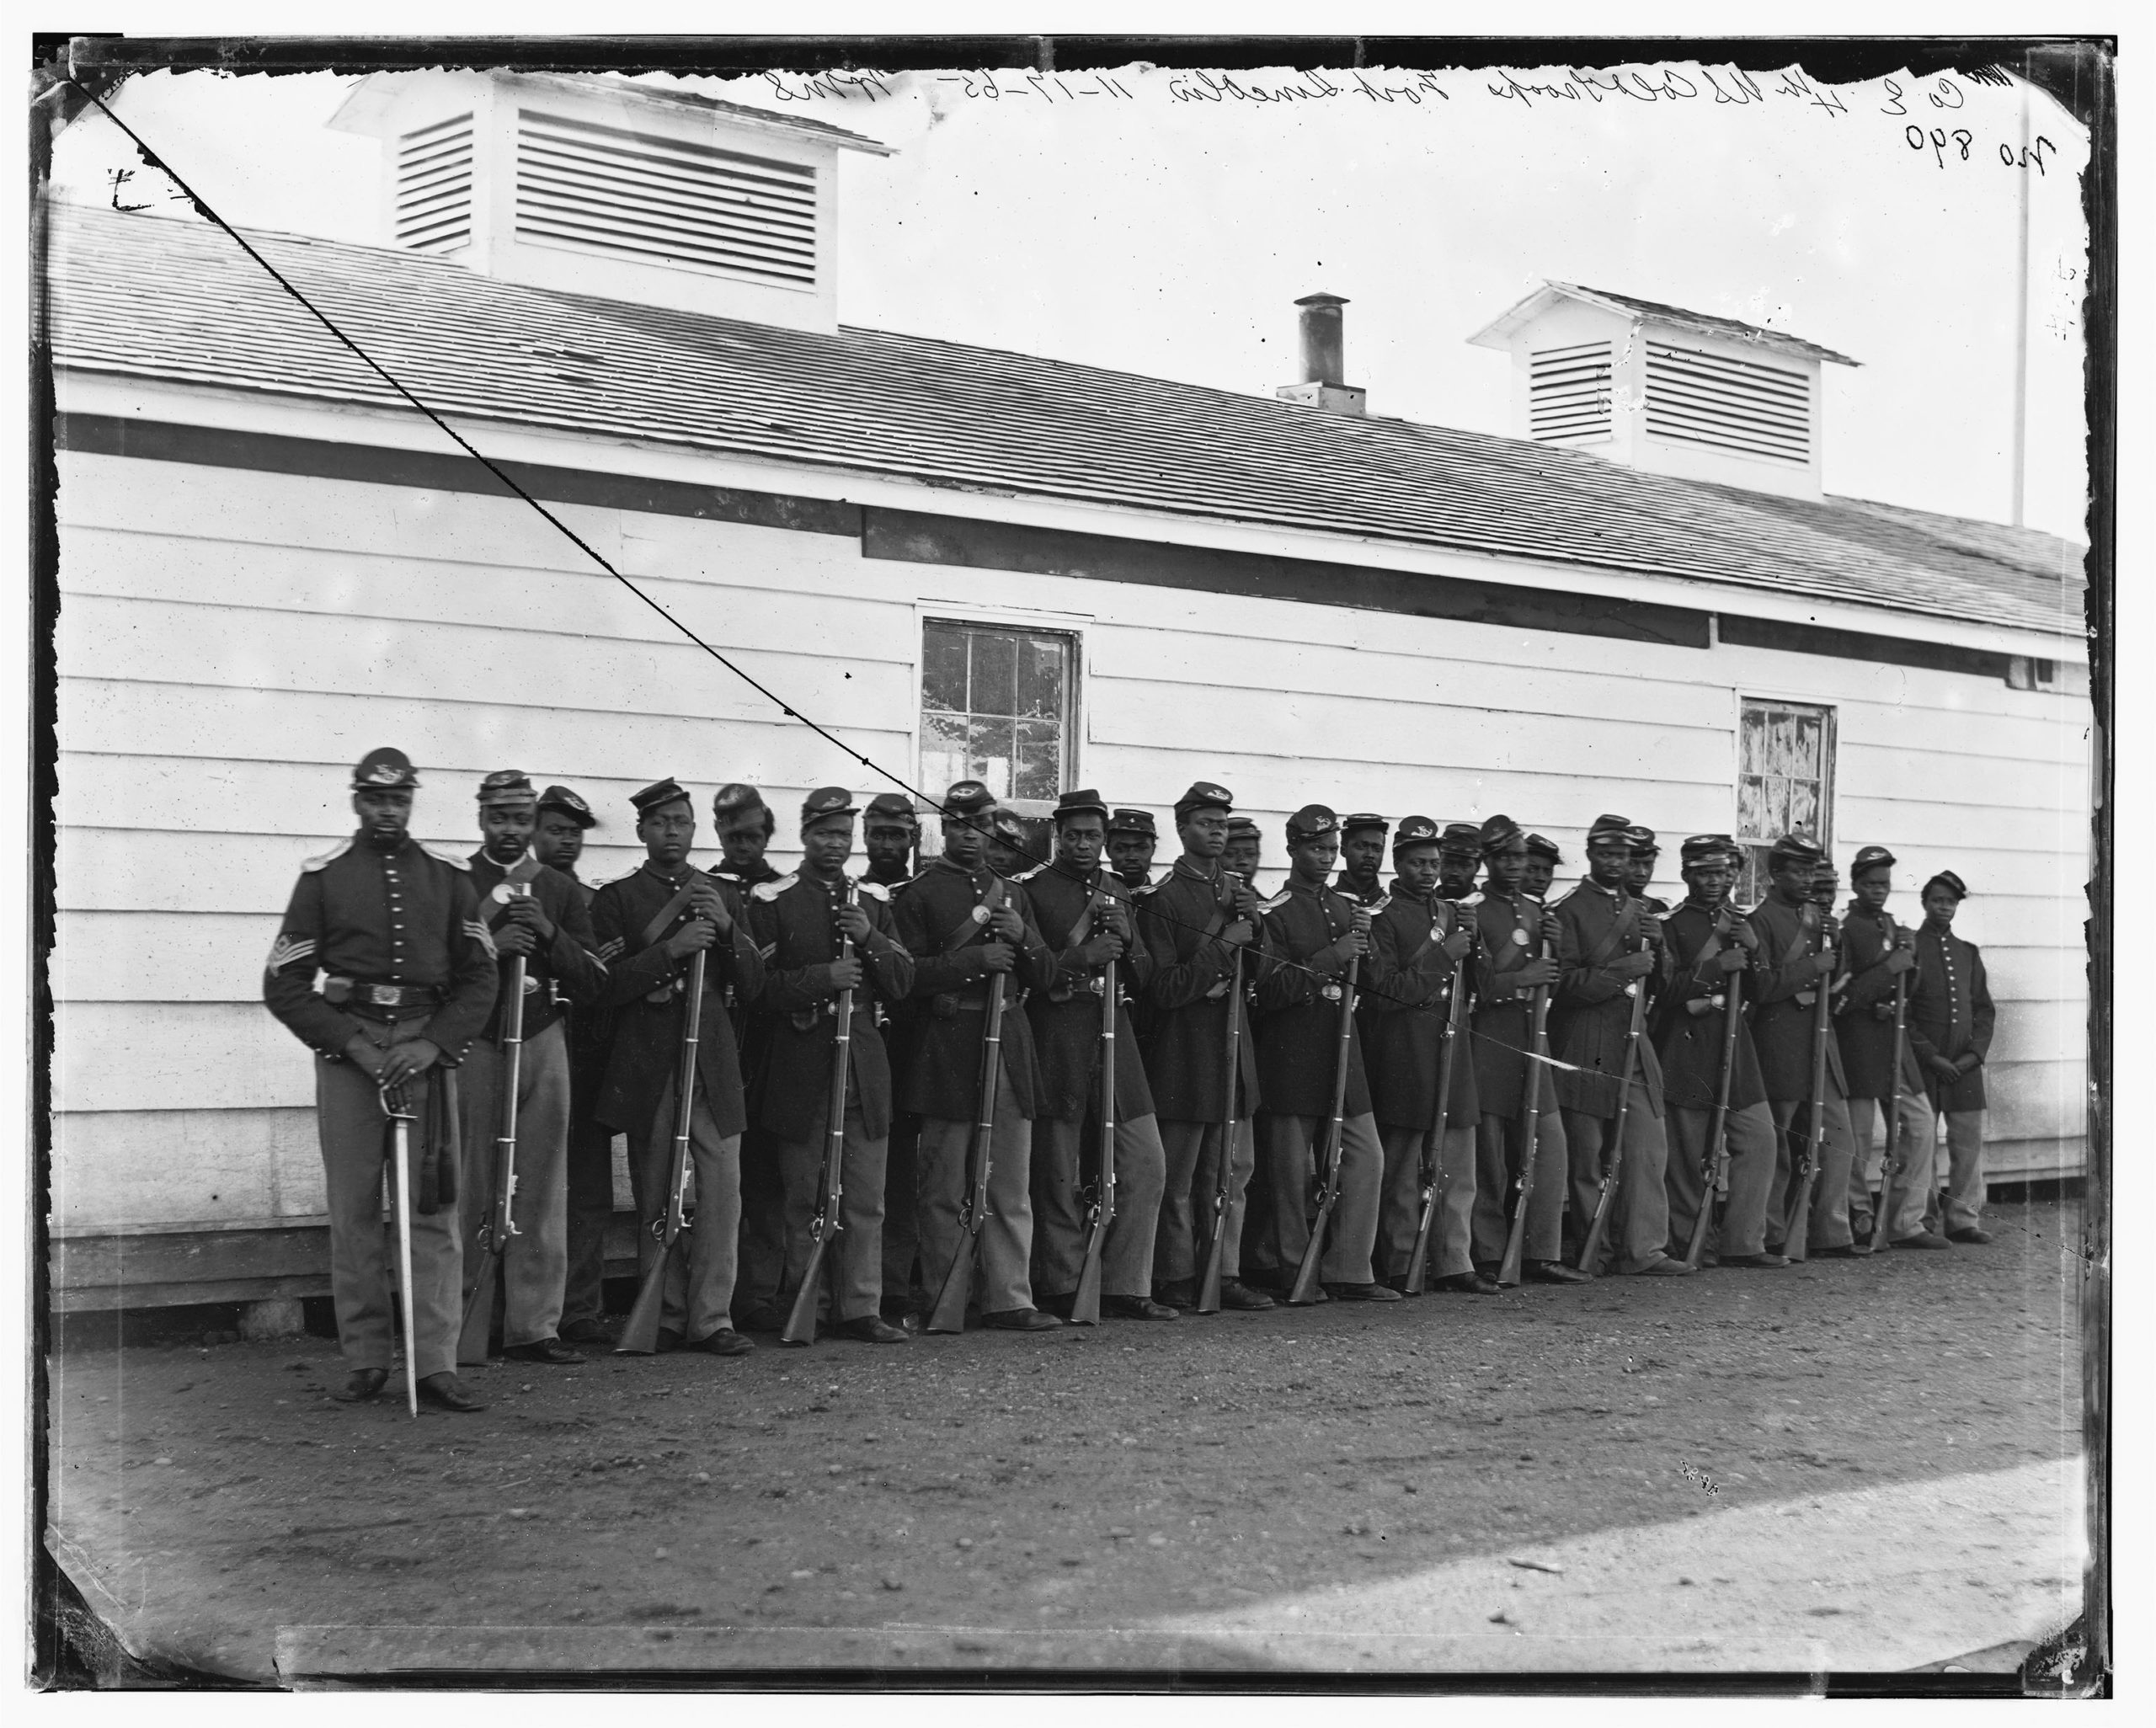 William Morris Smith, Company E, 4th U.S. Colored Infantry, at Fort Lincoln, District of Columbia, 1863-66, wet collodion glass negative (Library of Congress)